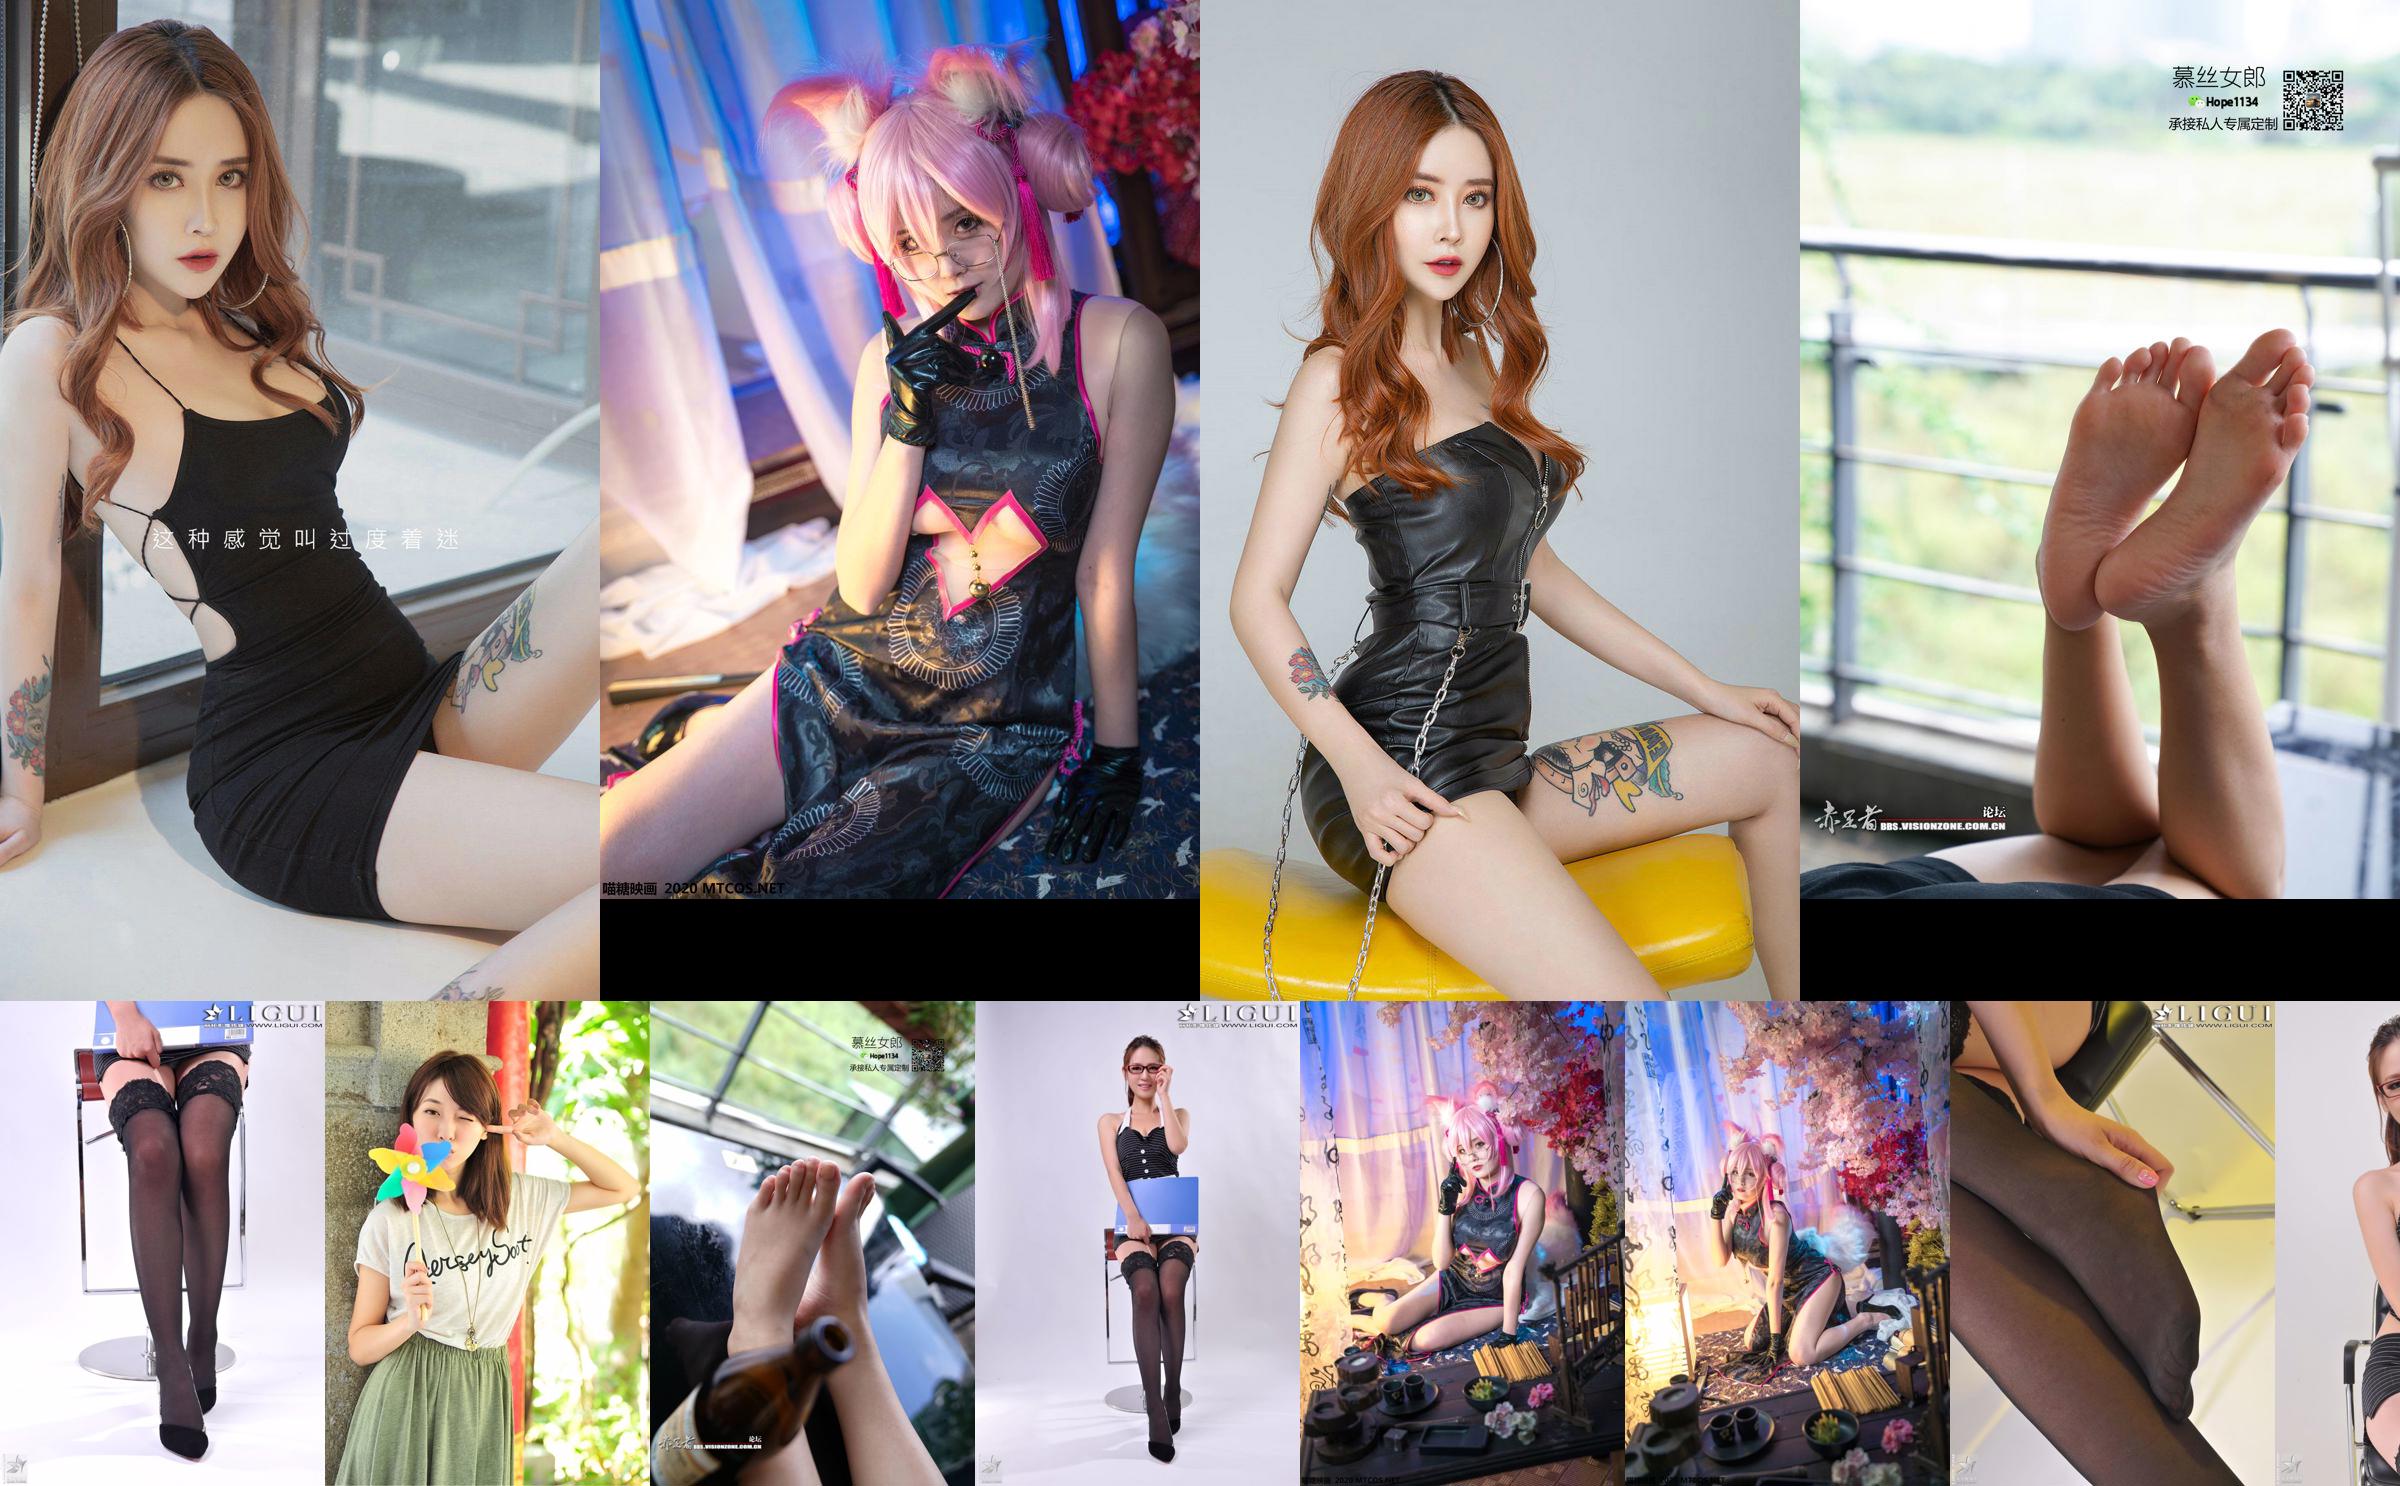 Model Xiaoyu "Excessively Fascinated" [Youguoquan Ai Youwu] No.1447 No.c5f480 Page 1